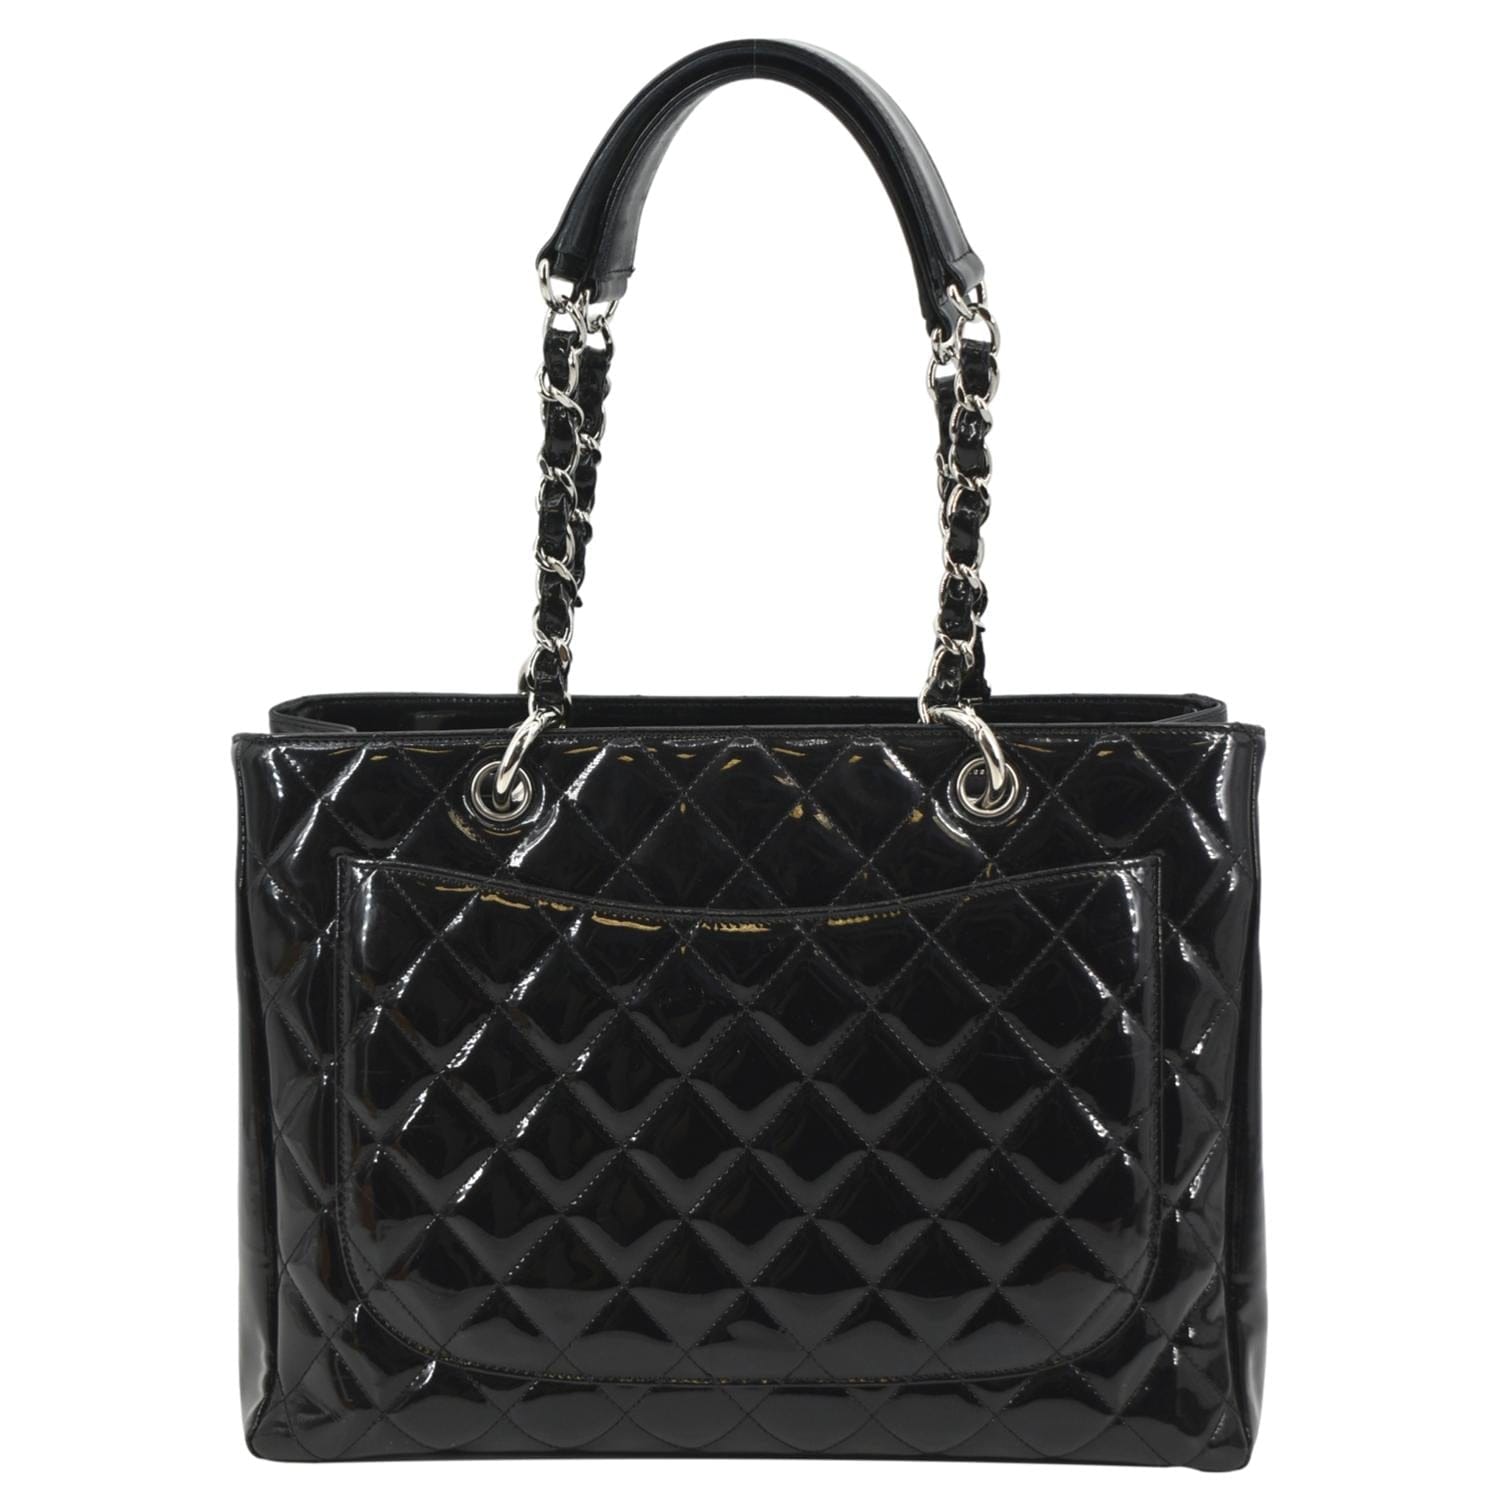 CHANEL Grand Shopping Patent Leather GST Tote Bag Black